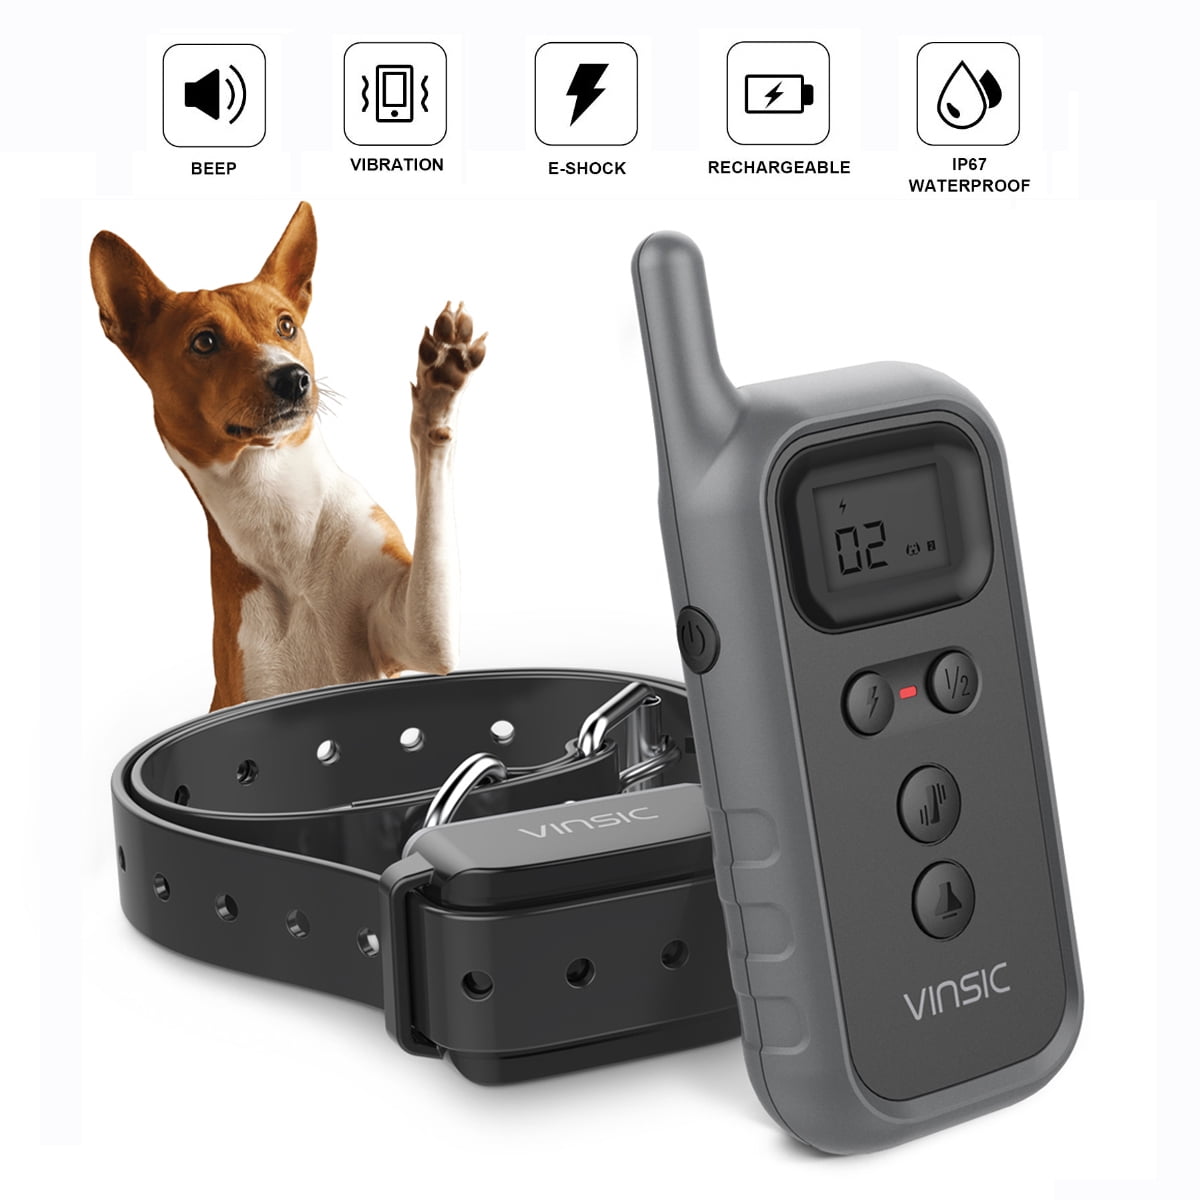 Dog Shock Training Collar Rechargeable 330yard Remote Control Waterproof IP67 US 